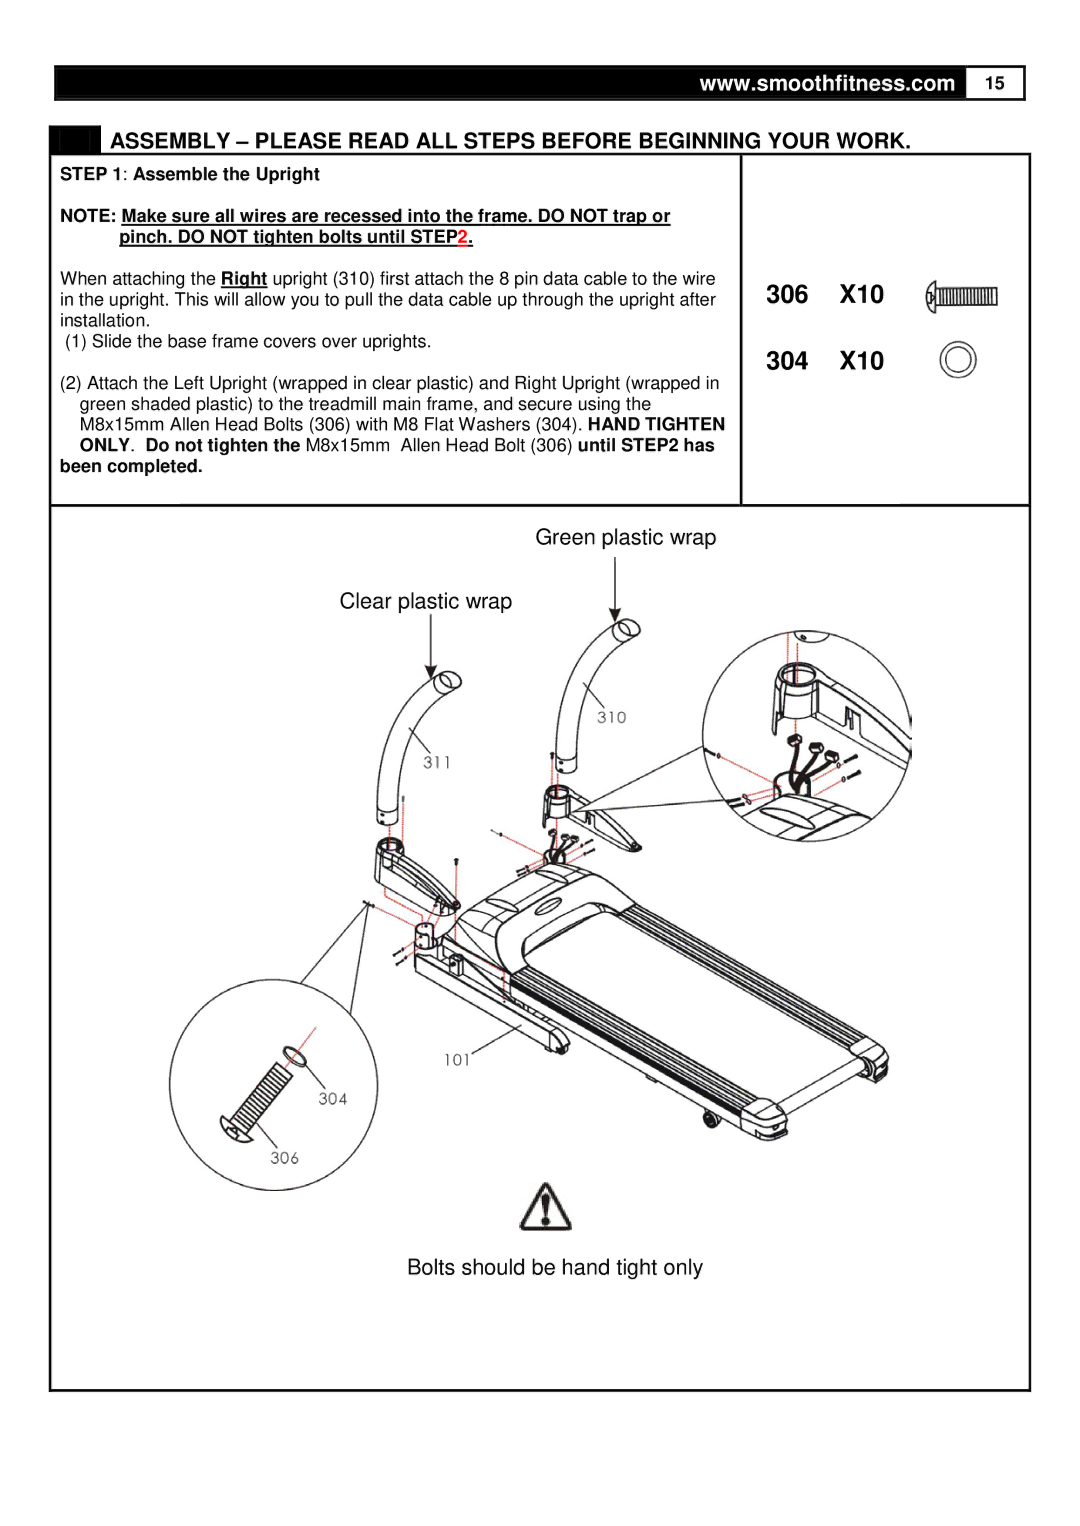 Smooth Fitness 835 user manual Assembly Please Read ALL Steps Before Beginning Your Work, Been completed 